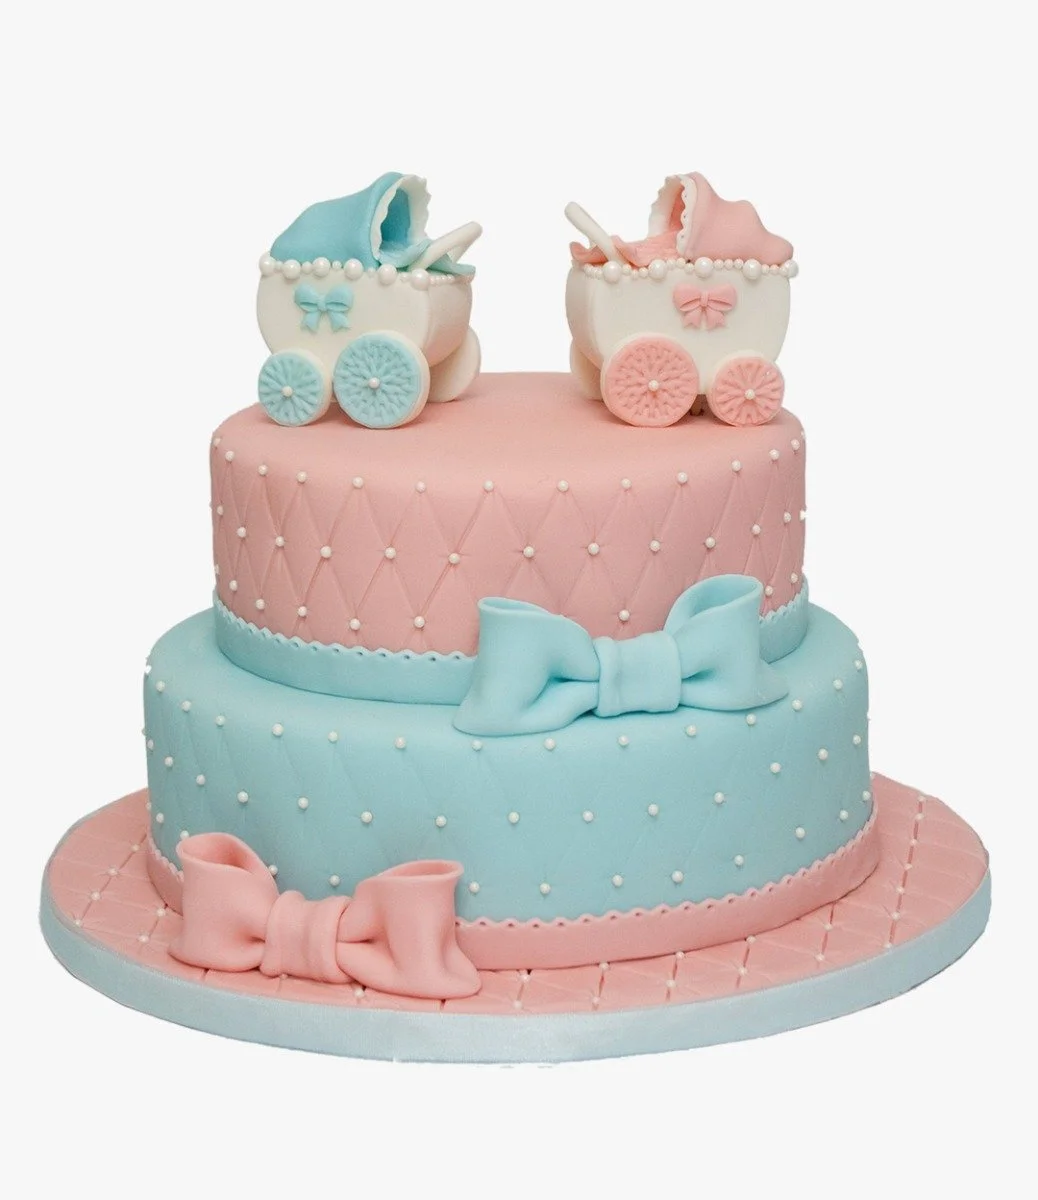 3D Tiered Customized Twin Babies Cake by Sugar Sprinkles 2